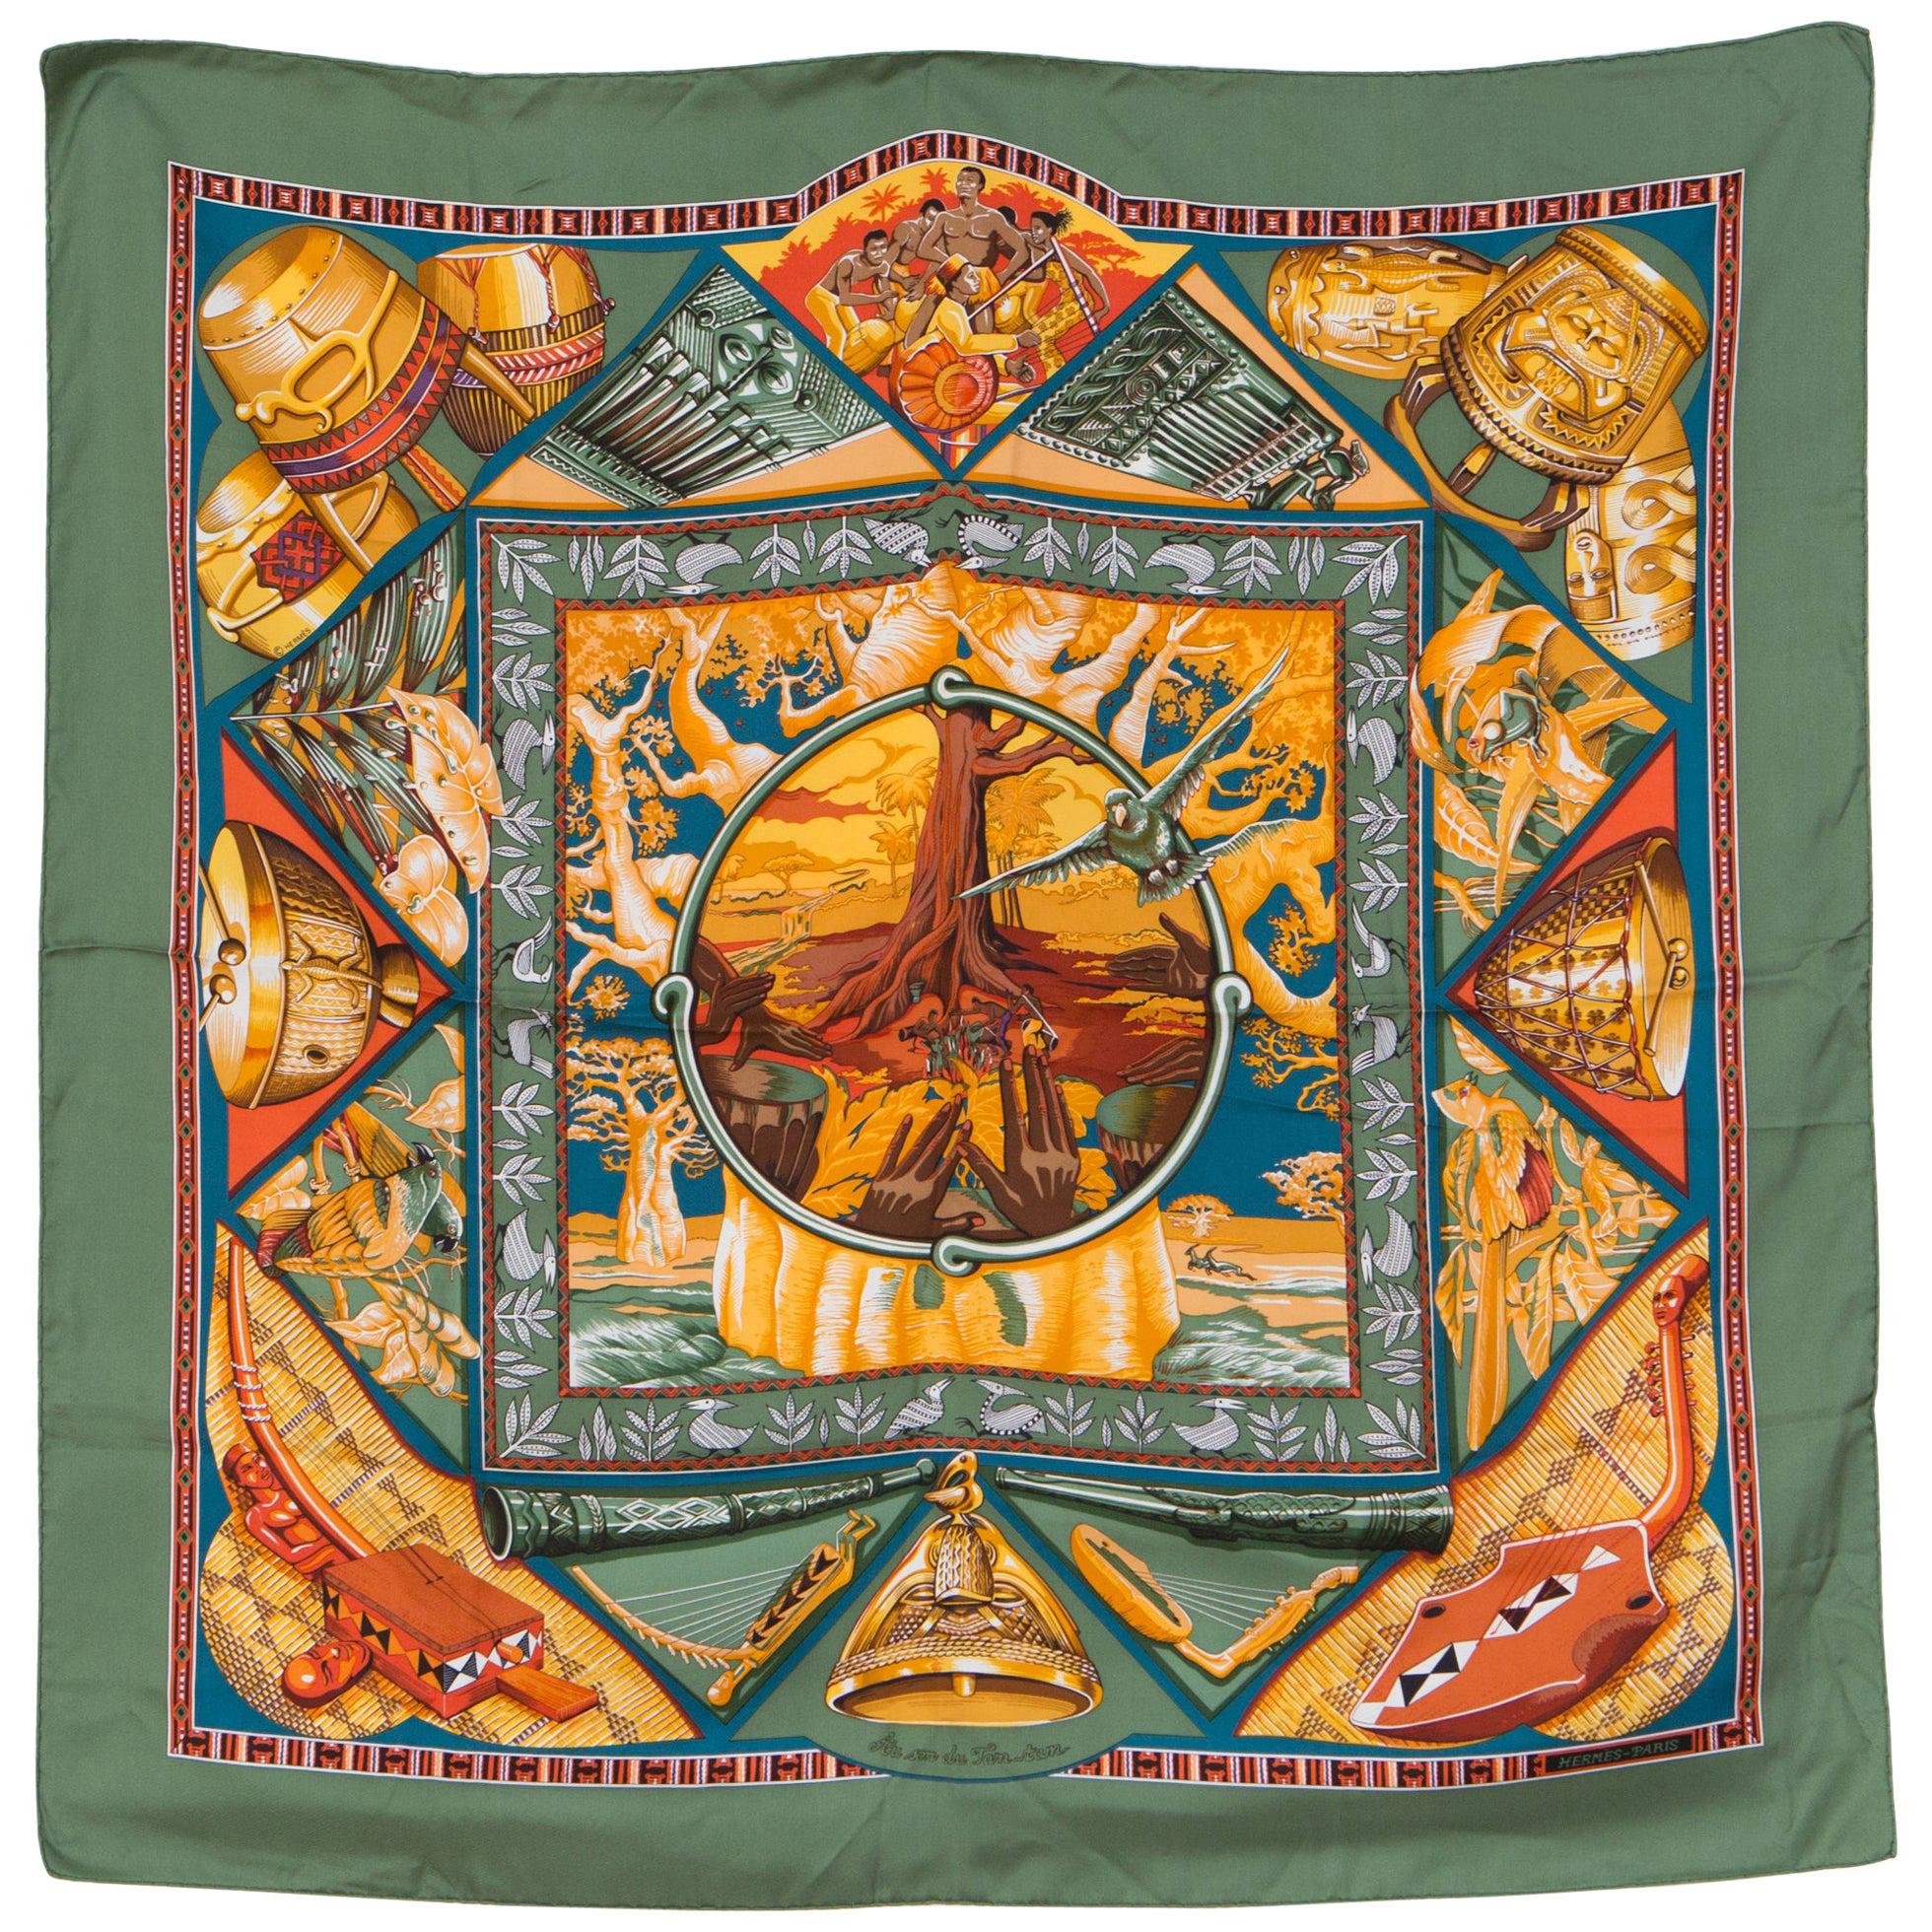 1998s Hermes Au Son du Tam Tam by Laurence Bourthoumieux Toutsy Silk Scarf